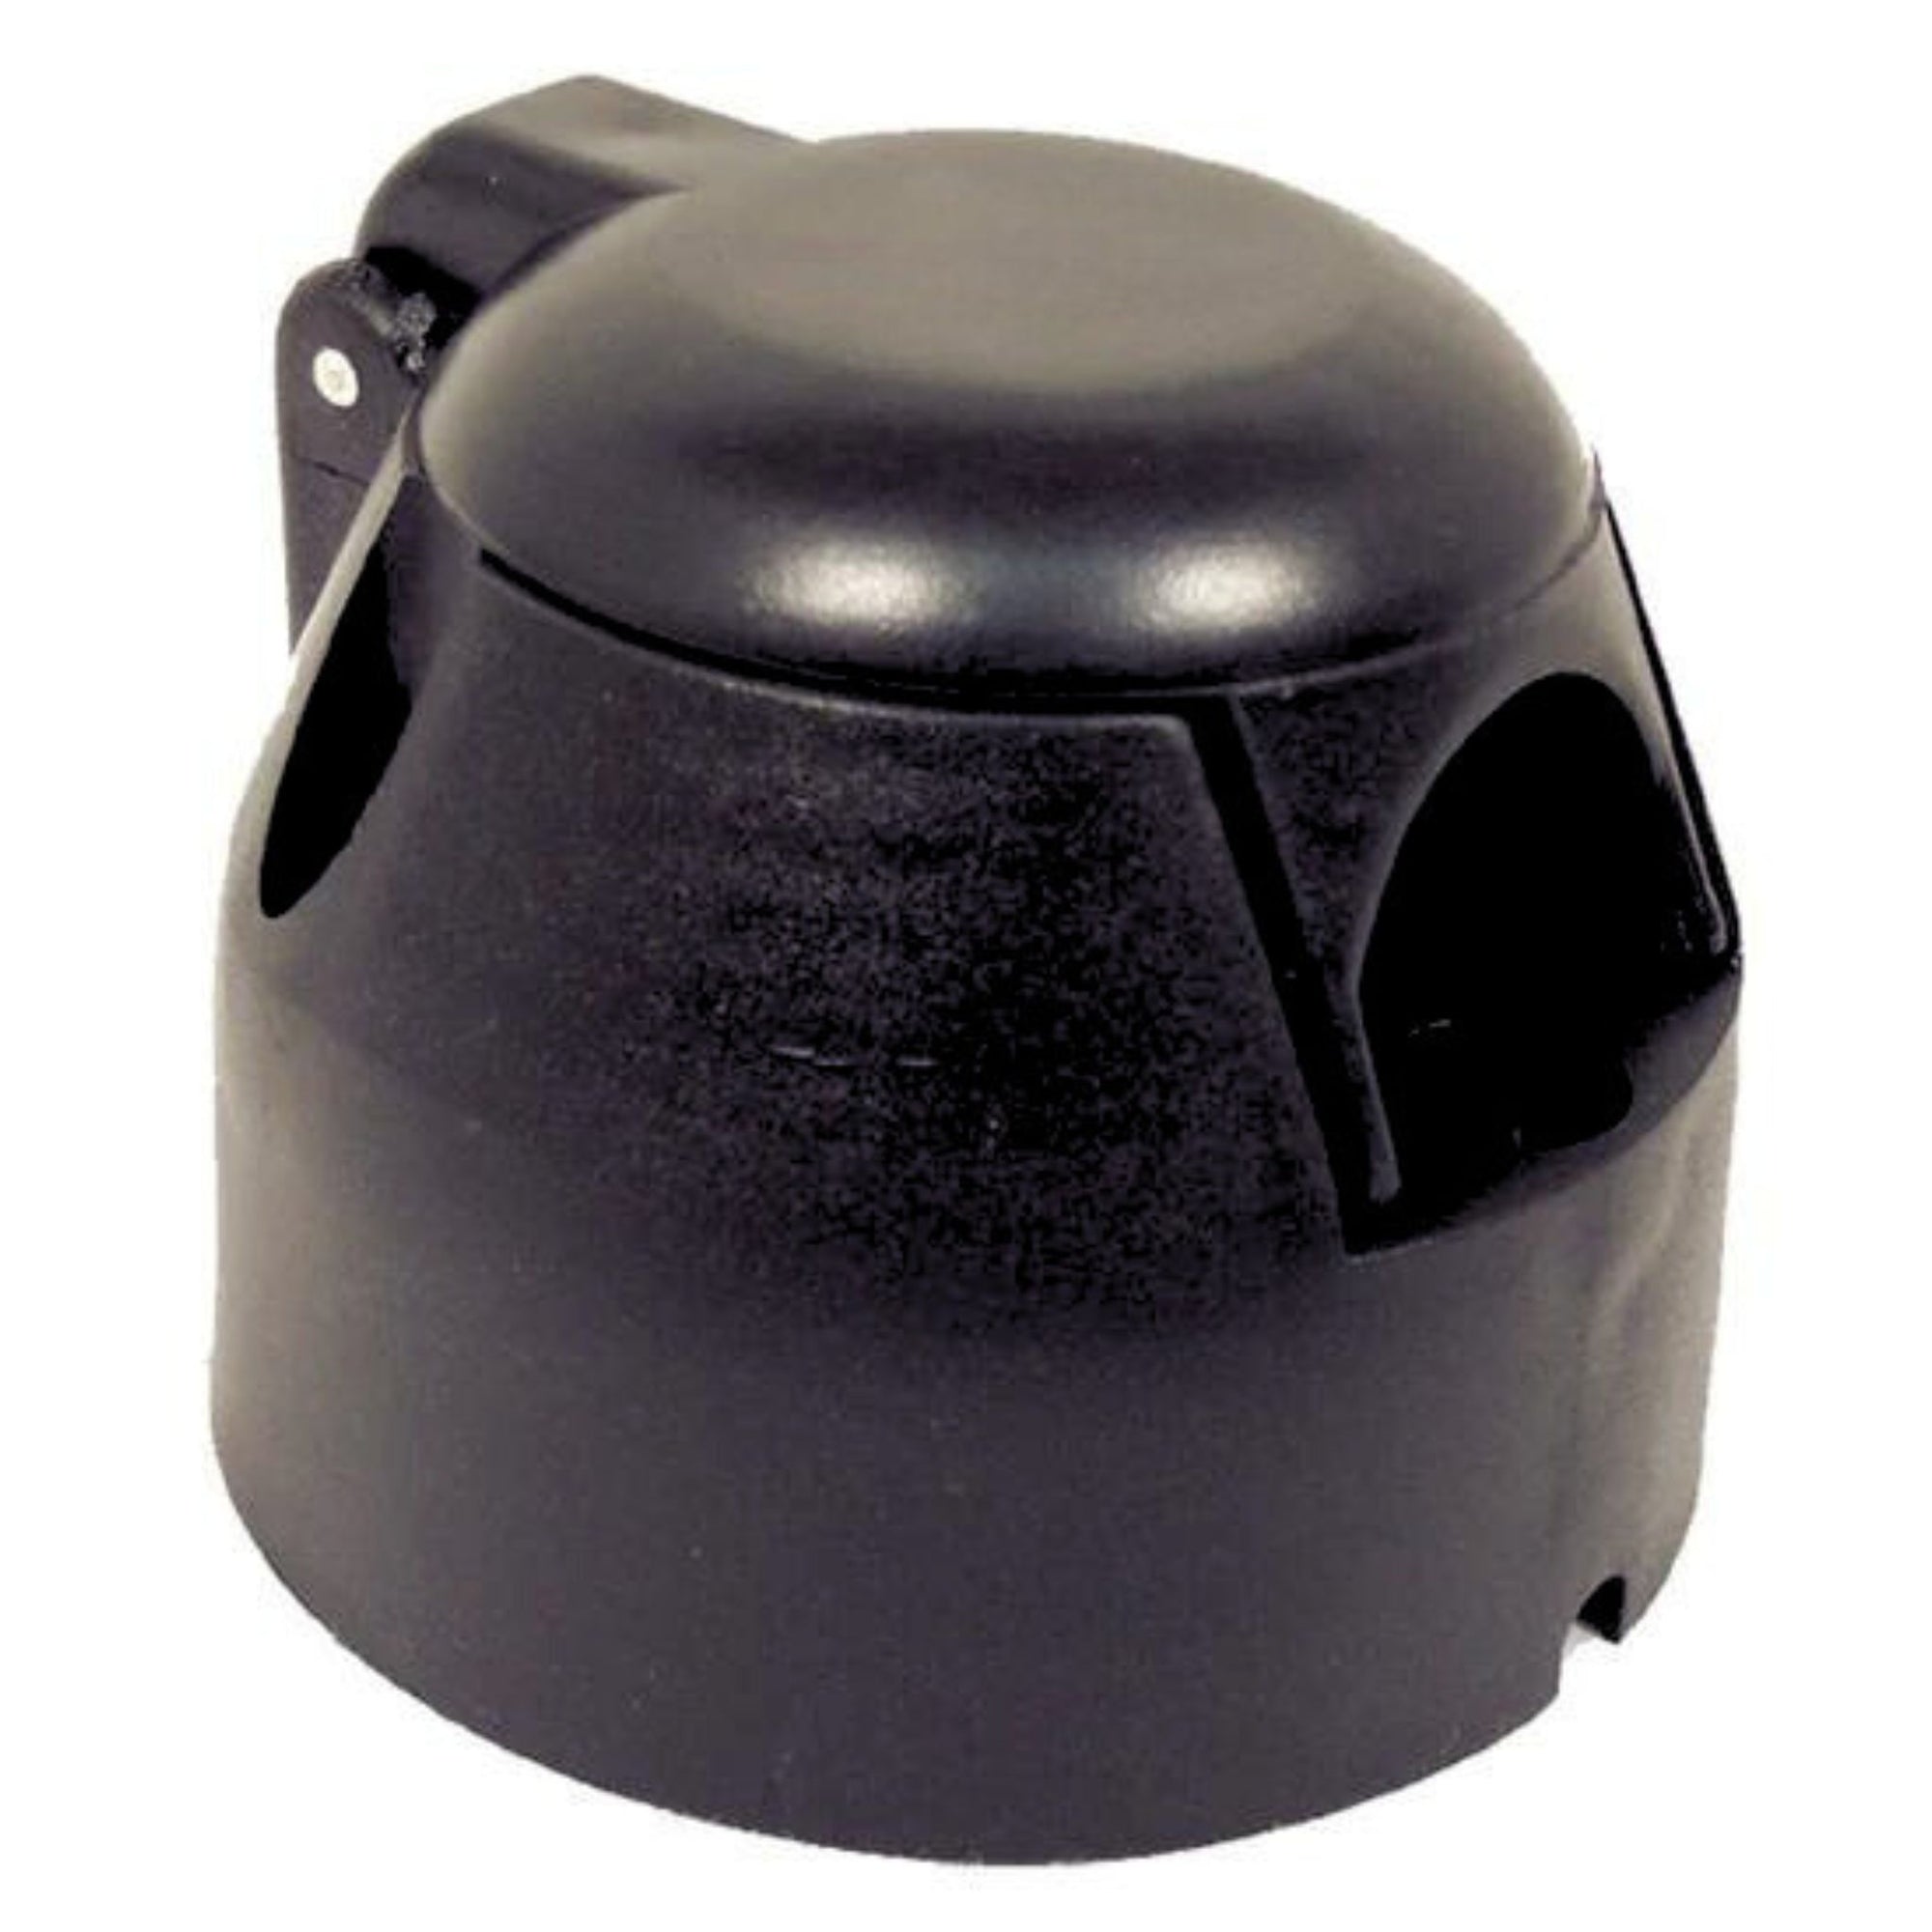 5 Pin Large Round Socket Trailer Plug |12 Volt | TS004215 - South East Clearance Centre